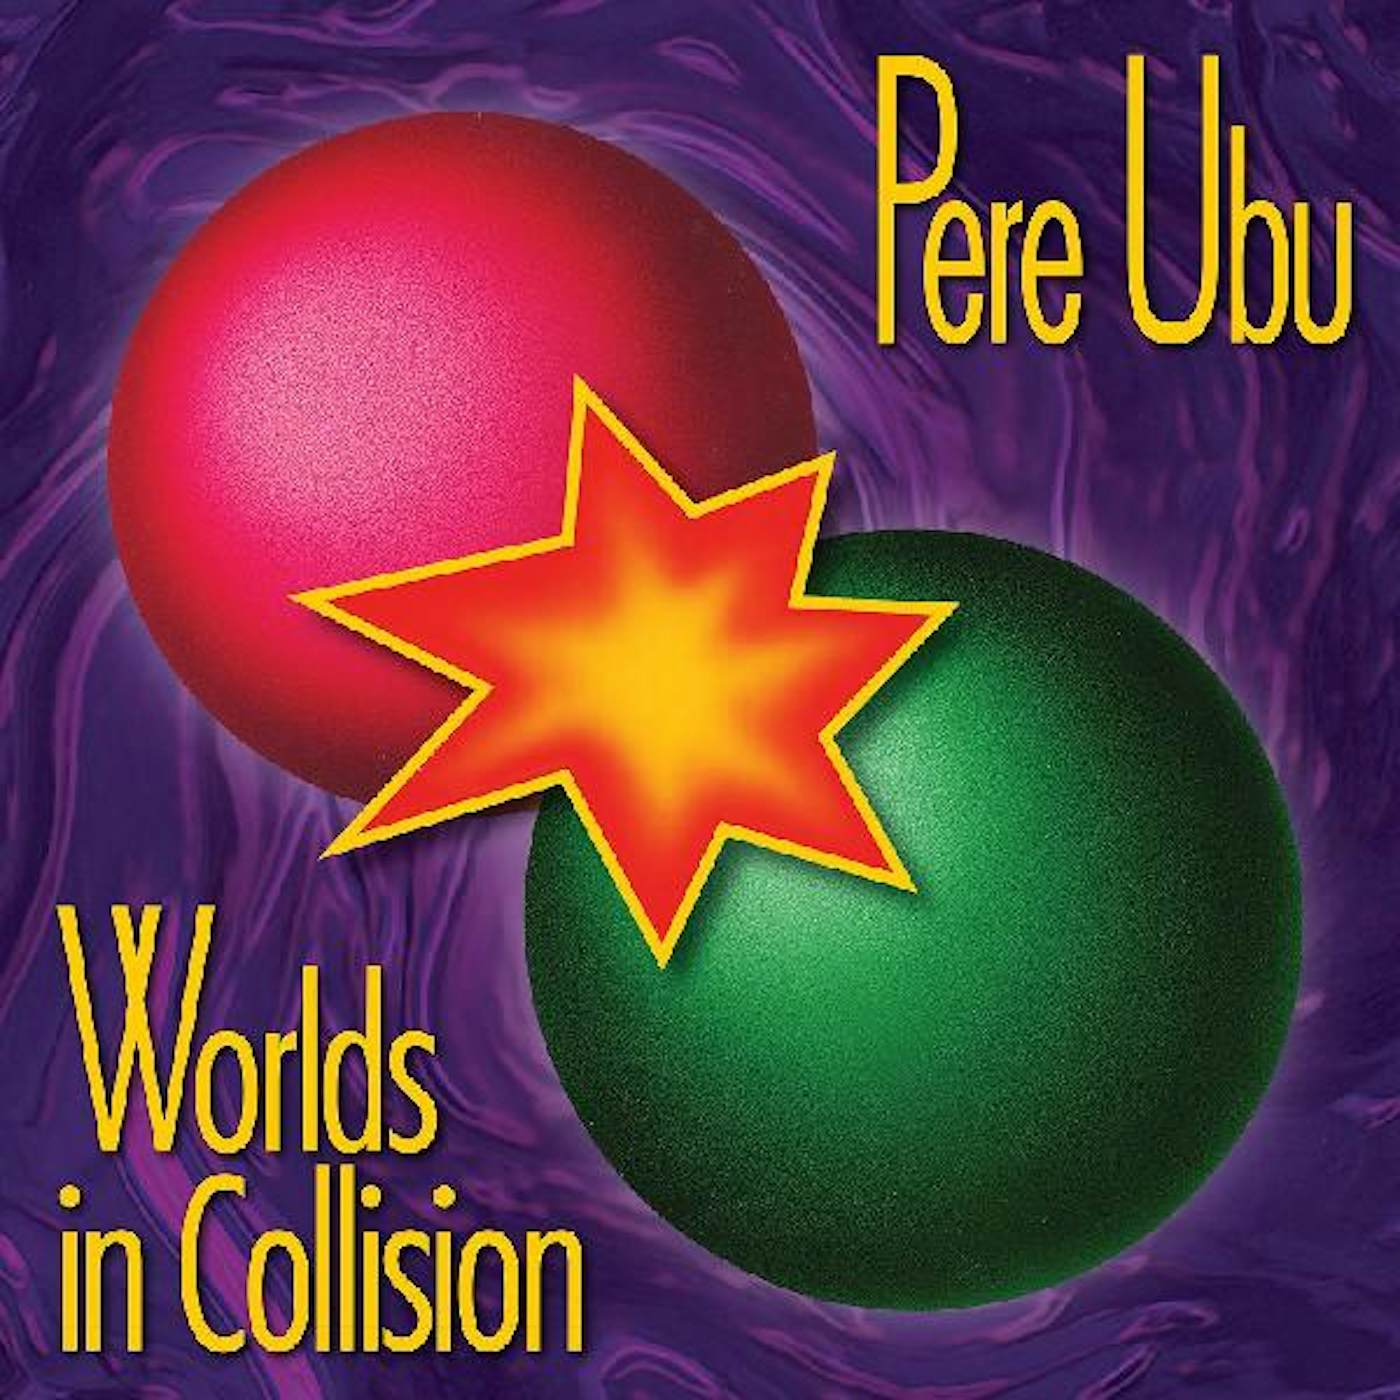 Pere Ubu WORLDS IN COLLISION CD